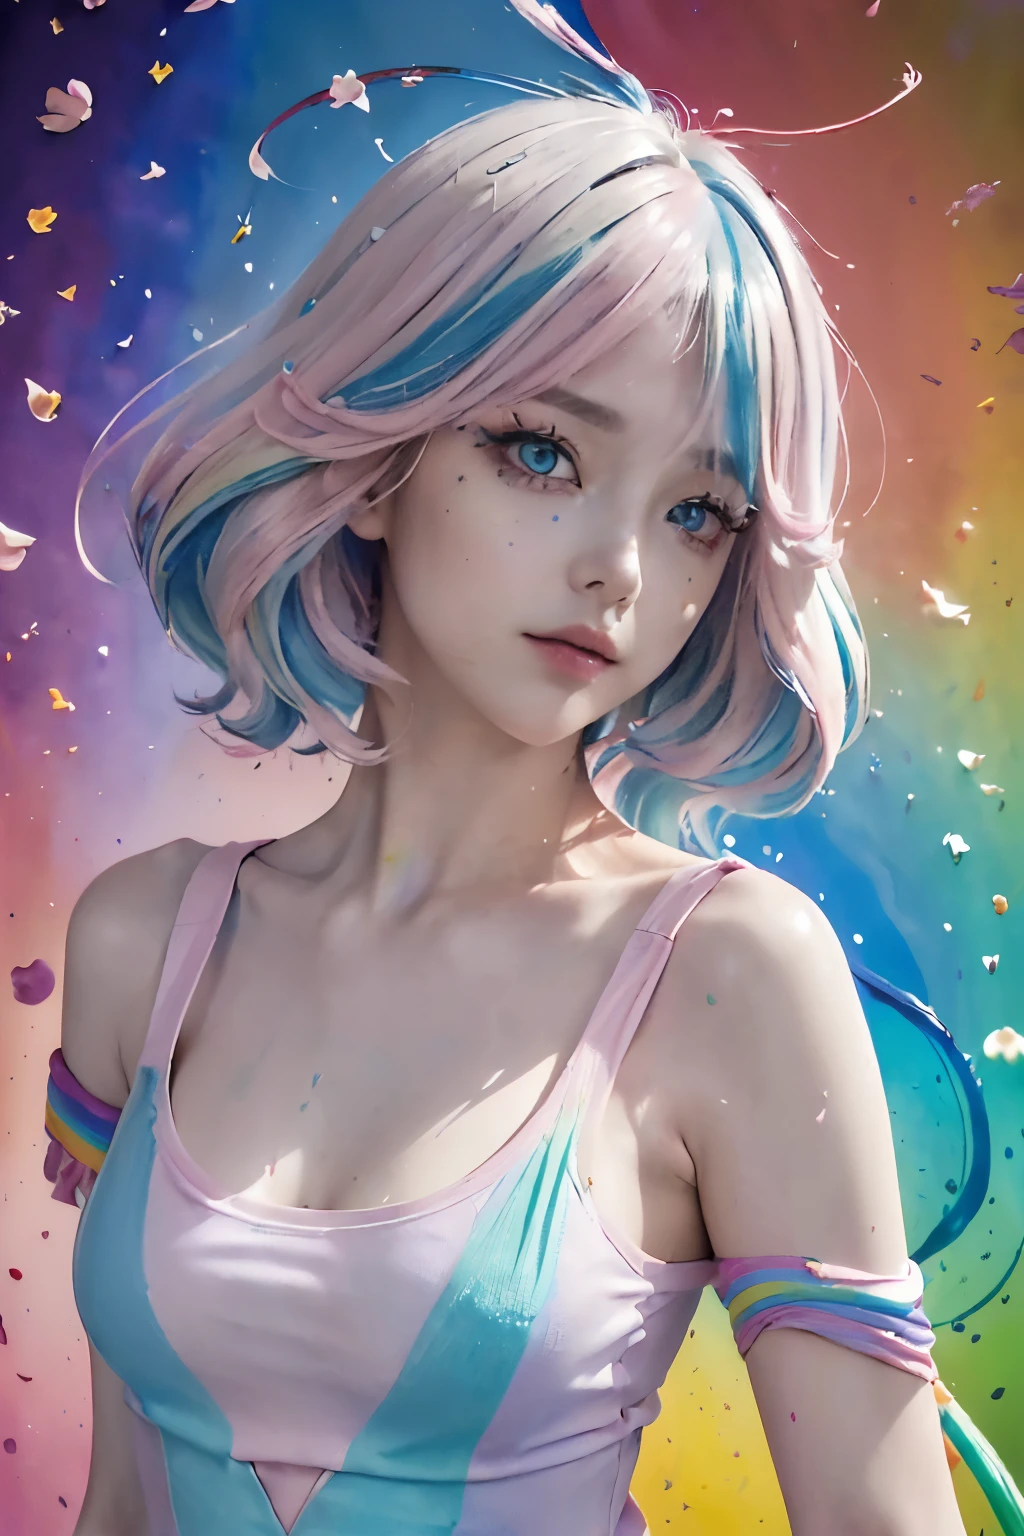 (Pink fashion T-shirt:1.9),(colored hair:1.8),(All colors of the rainbow:1.8),(((vertical画:1.6)),(:1.6),front,comics,illustration,,big eyes,crystal clear eyes,(Rainbow colored semi-long hair:1.7),exquisite cosmetics,Shut your mouth,(Small fresh:1.5),(Wipe your chest:1.6),long eyelashes,White shoulder T-shirt。,White shoulder sleeve shirt,looking at the audience,blue eyes,(rainbow colour hair:1.6),color splotches,(solo:1.8),color splotches,color splotches,color explosion,Thick lacquer style,Messy lines,((Shiny),(color),(color),(color),(color),color,Thick lacquer style,(color splotches),(color)splash,vertical,Upper body,Paintworksplash,acrylic paint,gradient,Paintwork,Highest image quality,highest quality,masterpiece,solo,depth of field,Topcoat,Colorful clothes,(grace:1.2),gorgeous,lwind, (Elegant: 1.3), (Petals: 1.4)，(((masterpiece))),(((best quality))),((ultra-detailed)),(illustration),(dynamic angle),((floating)),(paint),((disheveled hair)),(solo),(1girl) , (((detailed anima face))),((beautiful detailed face)),collar,bare shoulders,blue hair, ((colorful hair)),((streaked hair)),beautiful detailed eyes,(Gradient color eyes),(((colorful eyes))),(((colorful background))),(((high saturation))),(((surrounded by colorful splashes))),(((colorful background))),(((high saturation))),(((surrounded by colorful splashes))),(((colorful background))),(((high saturation))),(((surrounded by colorful splashes))),